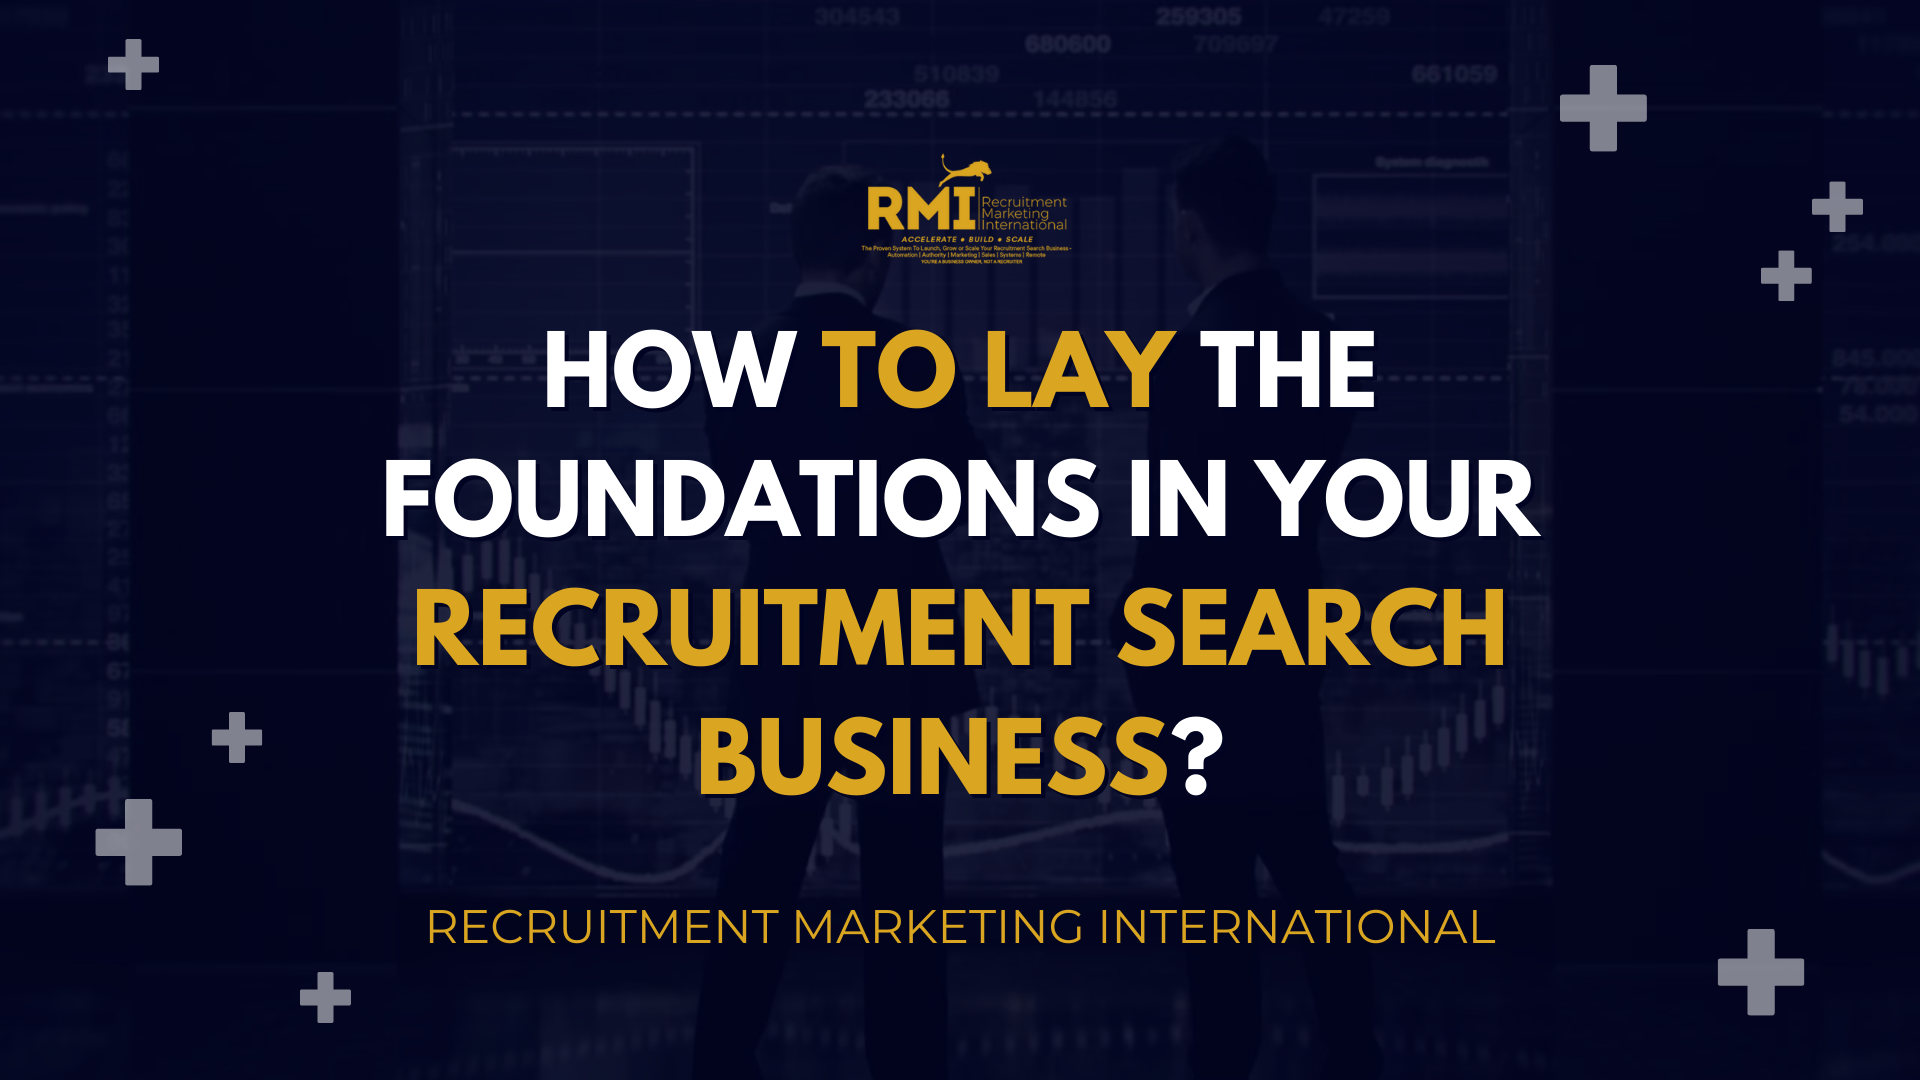 PODCAST 222 – HOW TO LAY THE FOUNDATIONS IN YOUR RECRUITMENT SEARCH BUSINESS?